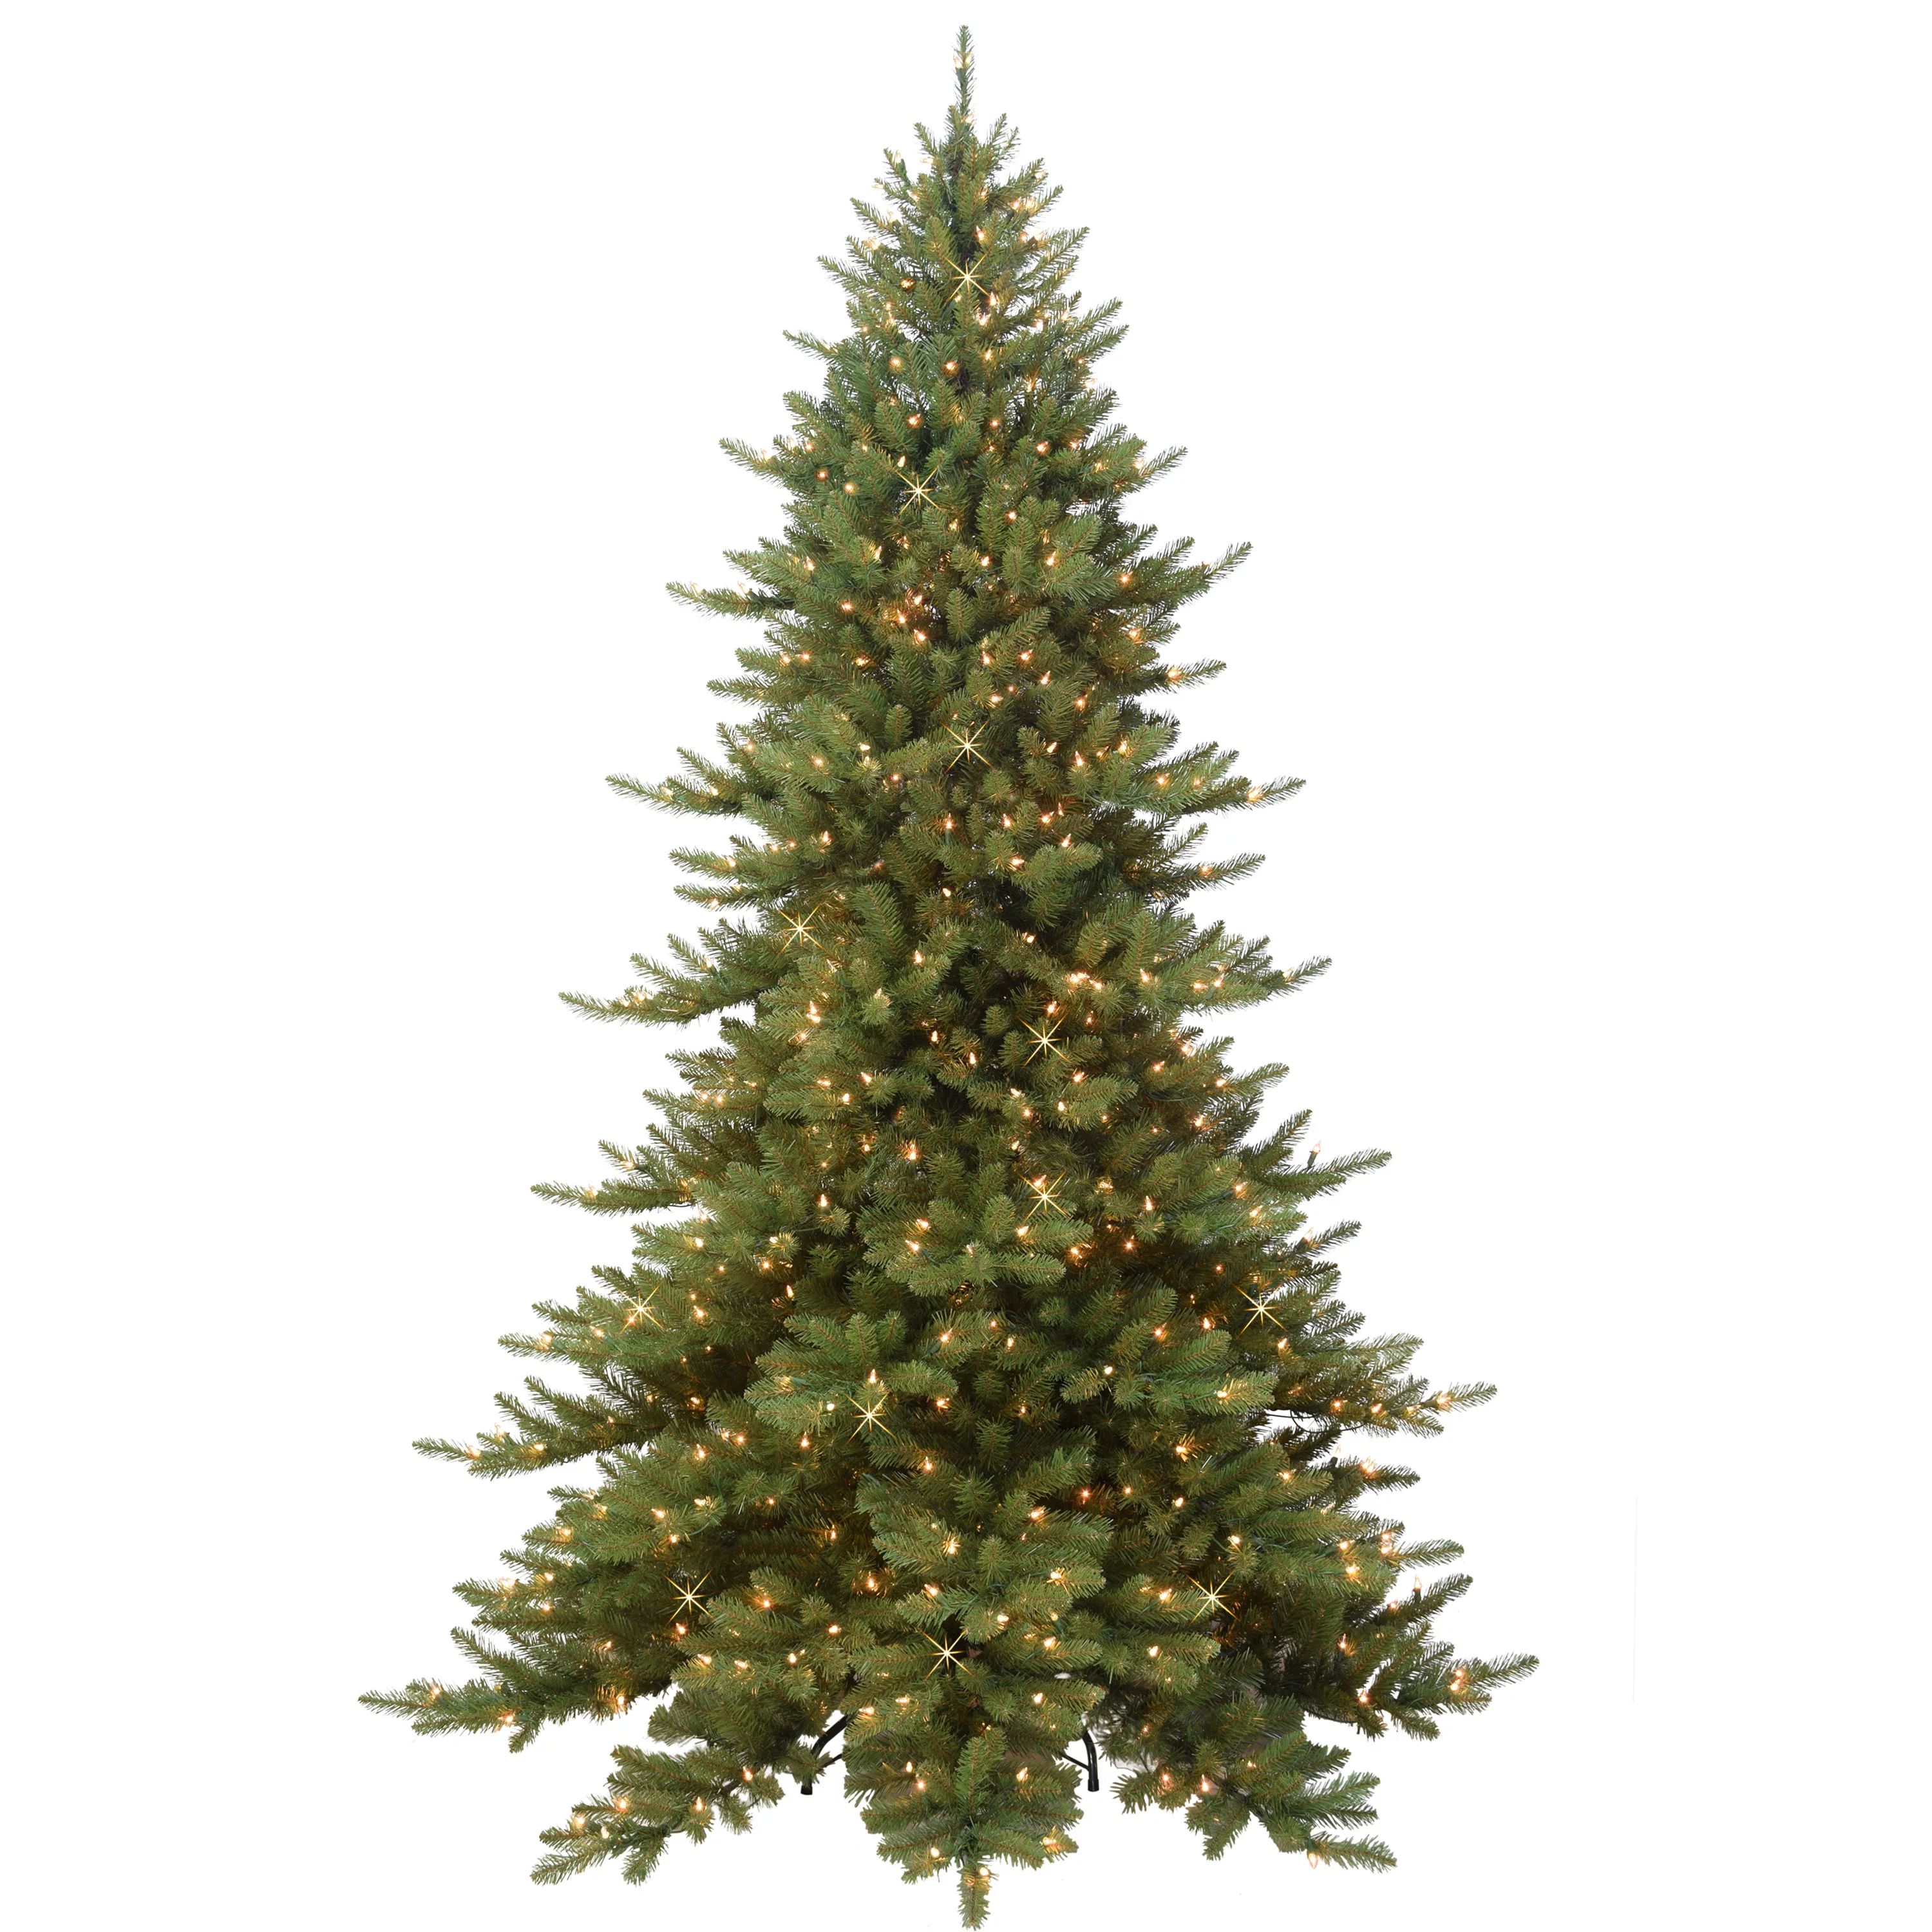 NEW! Puleo Intl. 7.5' ROYAL MAJESTIC Fraser Fir Green Tree with MEMORY TIPS and SURE-LIT POLE wit... | Walmart (US)